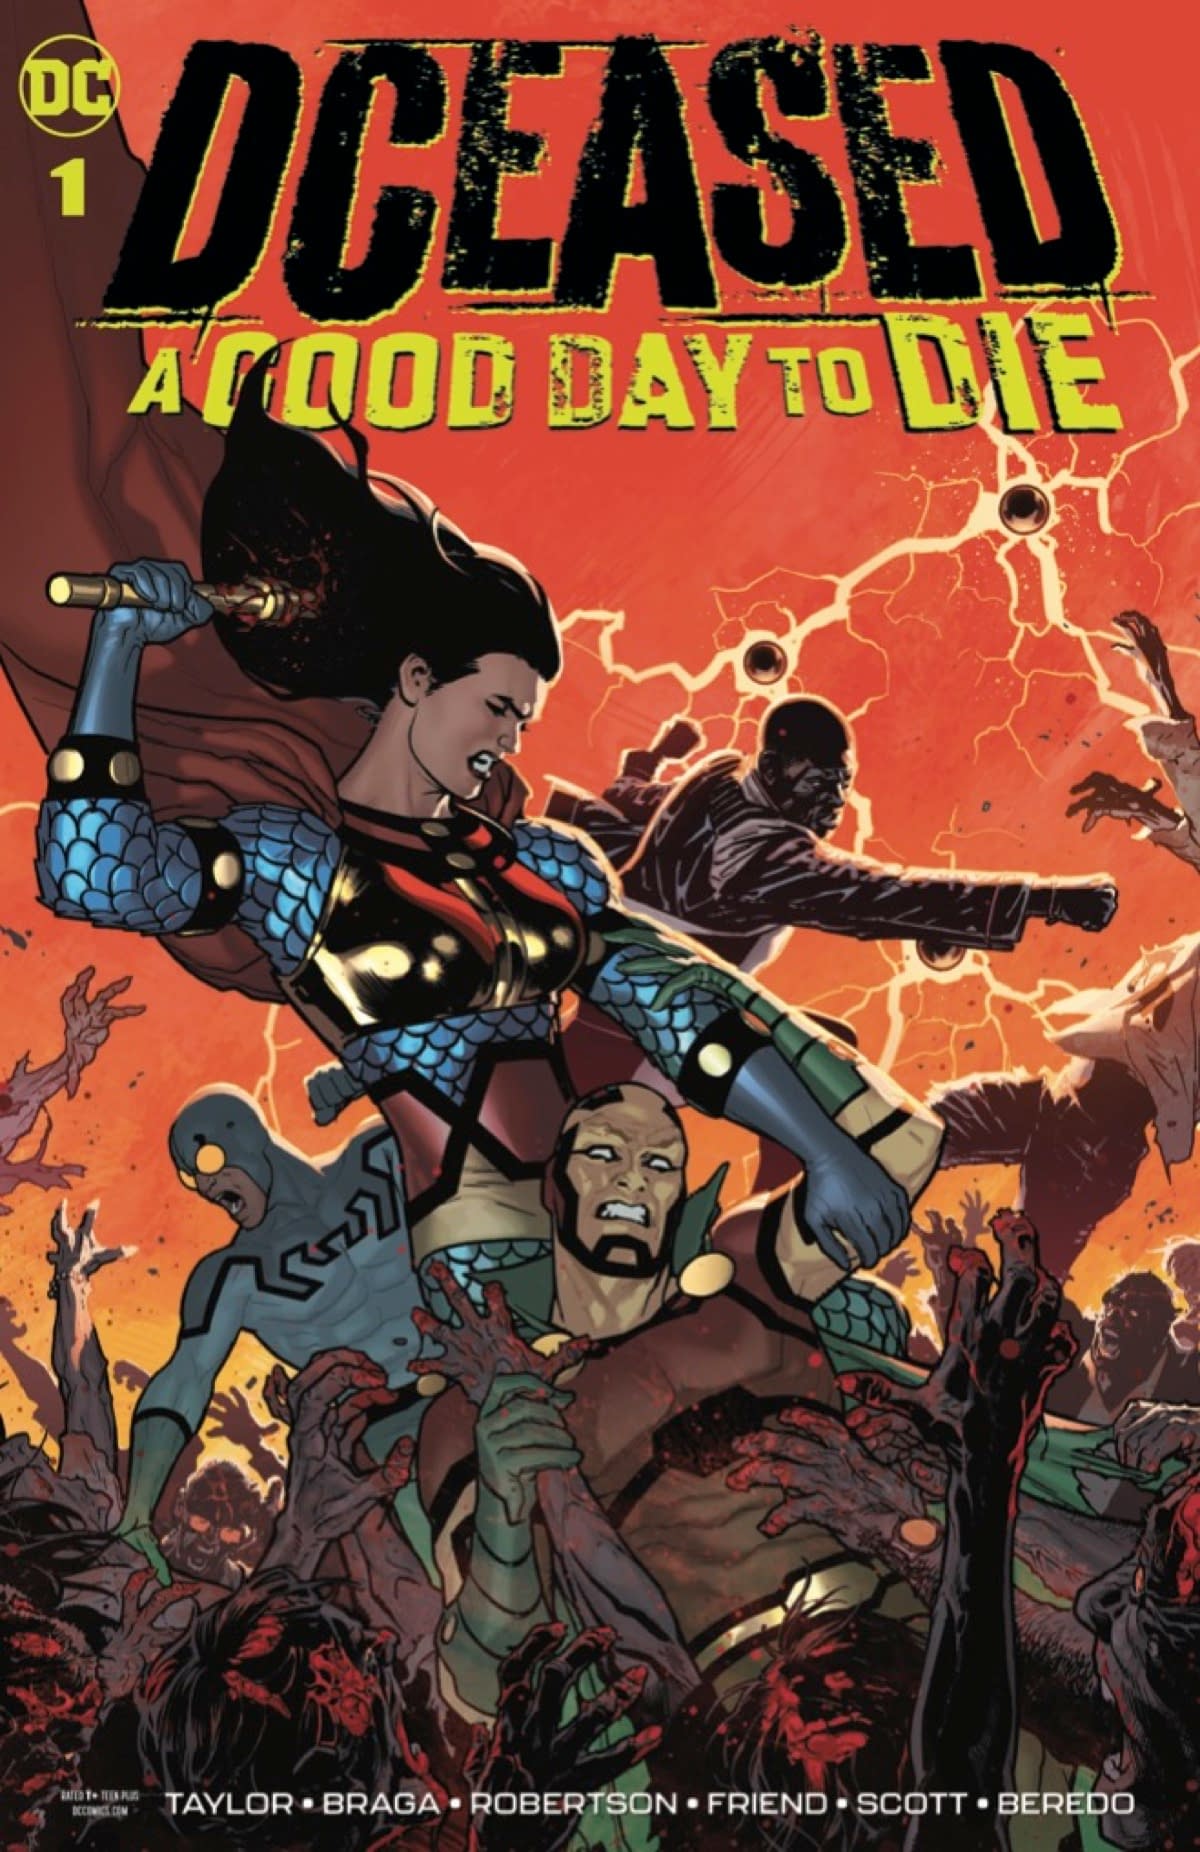 EXCLUSIVE DCeased: A Good Day to Die #1 Preview